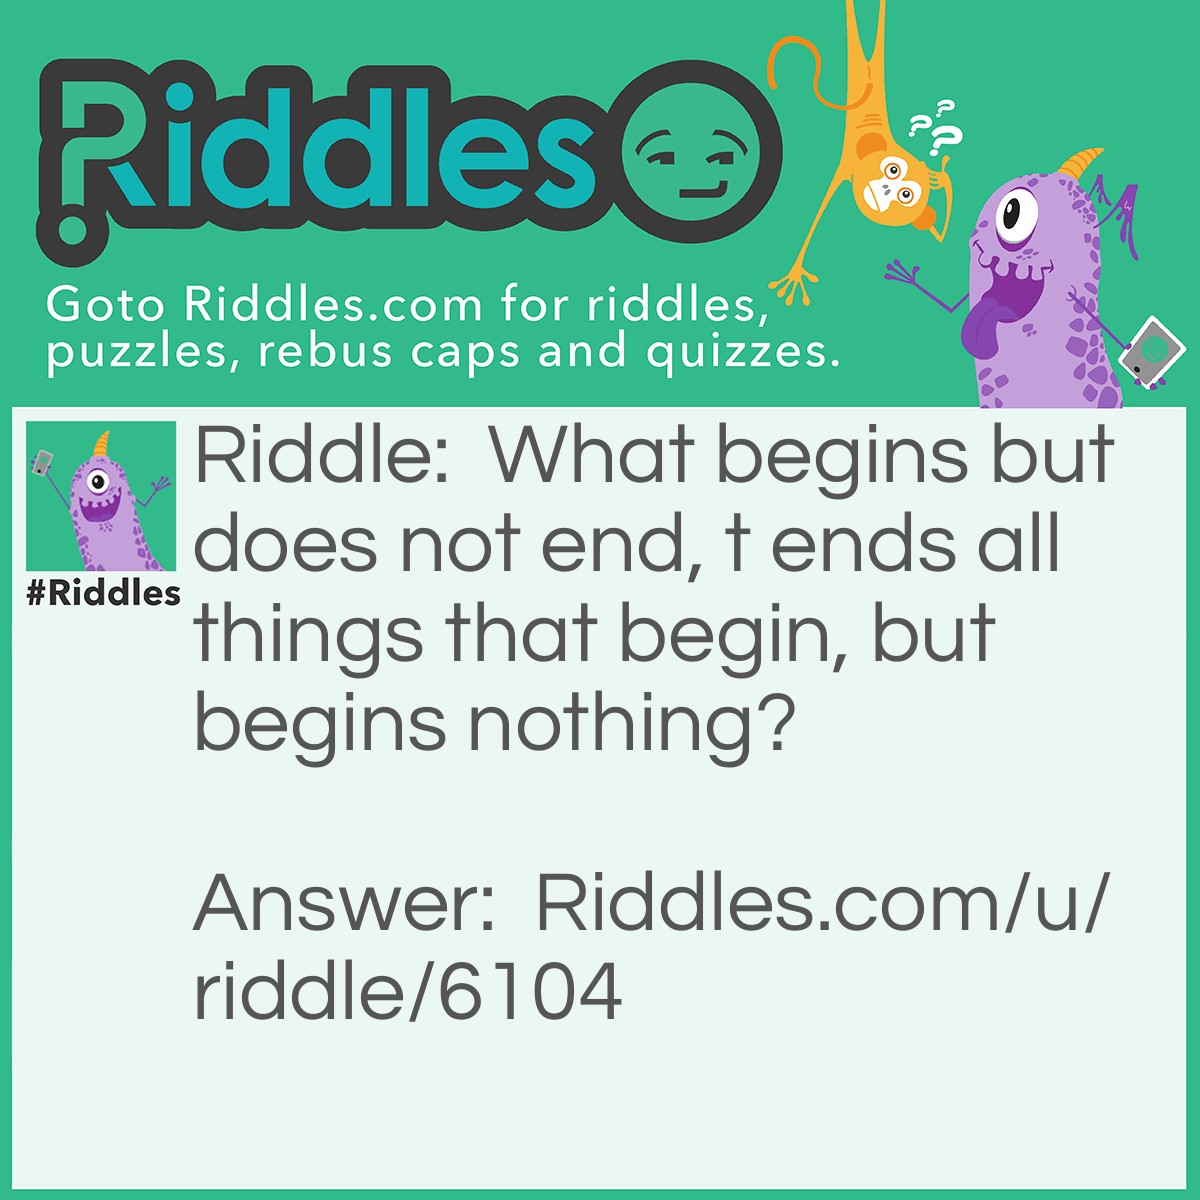 Riddle: What begins but does not end, t ends all things that begin, but begins nothing? Answer: Death.